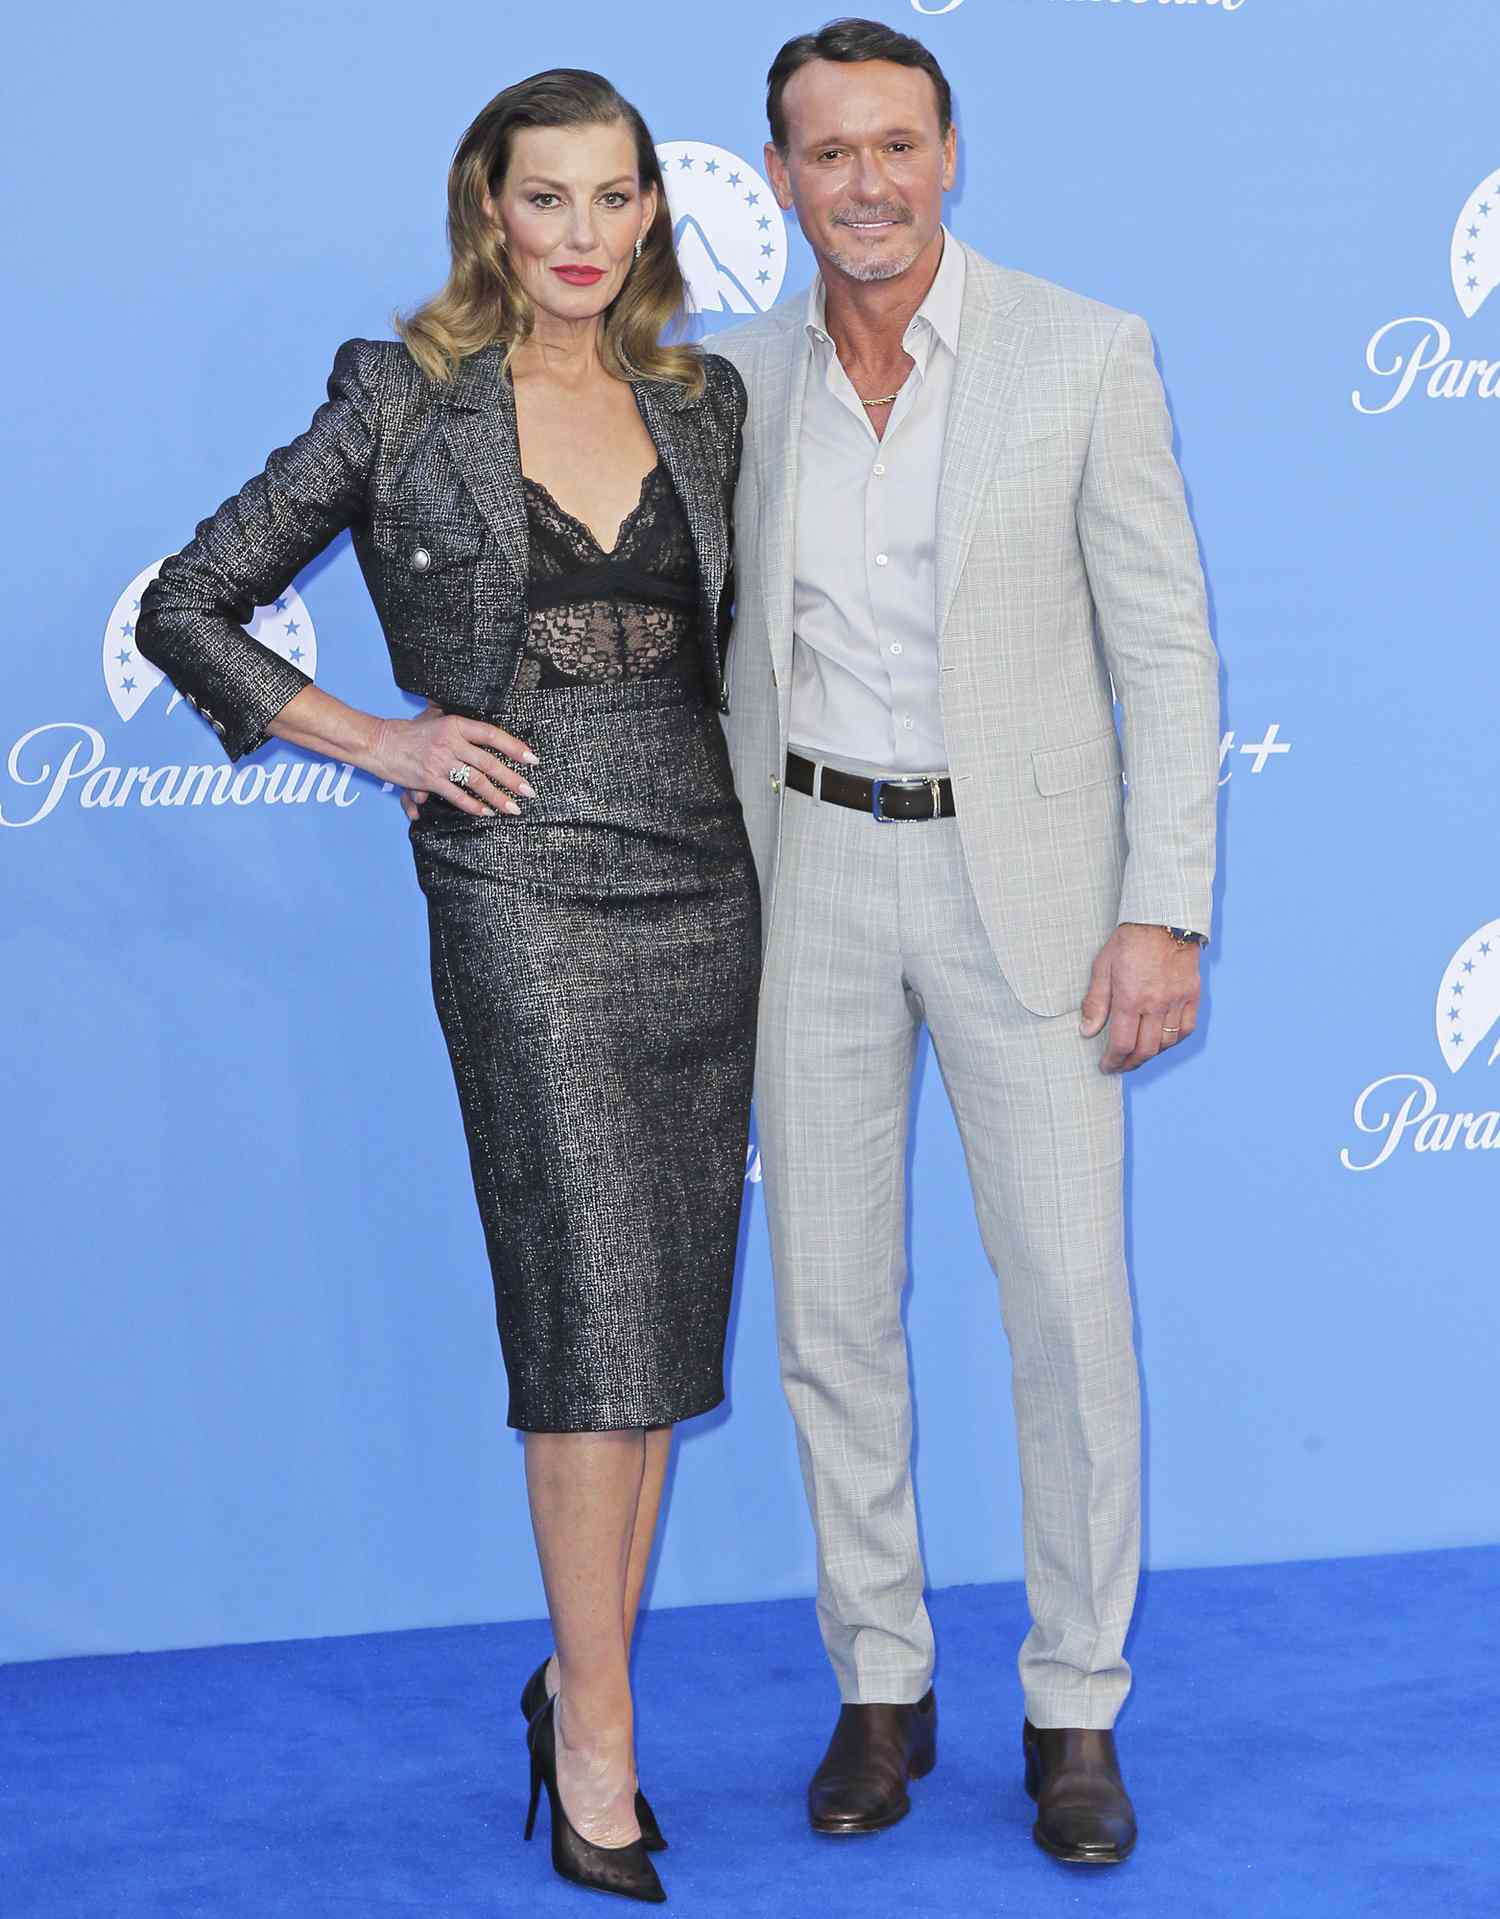 Faith Hill and Tim McGraw attend the UK launch of Paramount+ at Outernet London on June 20, 2022 in London, England.